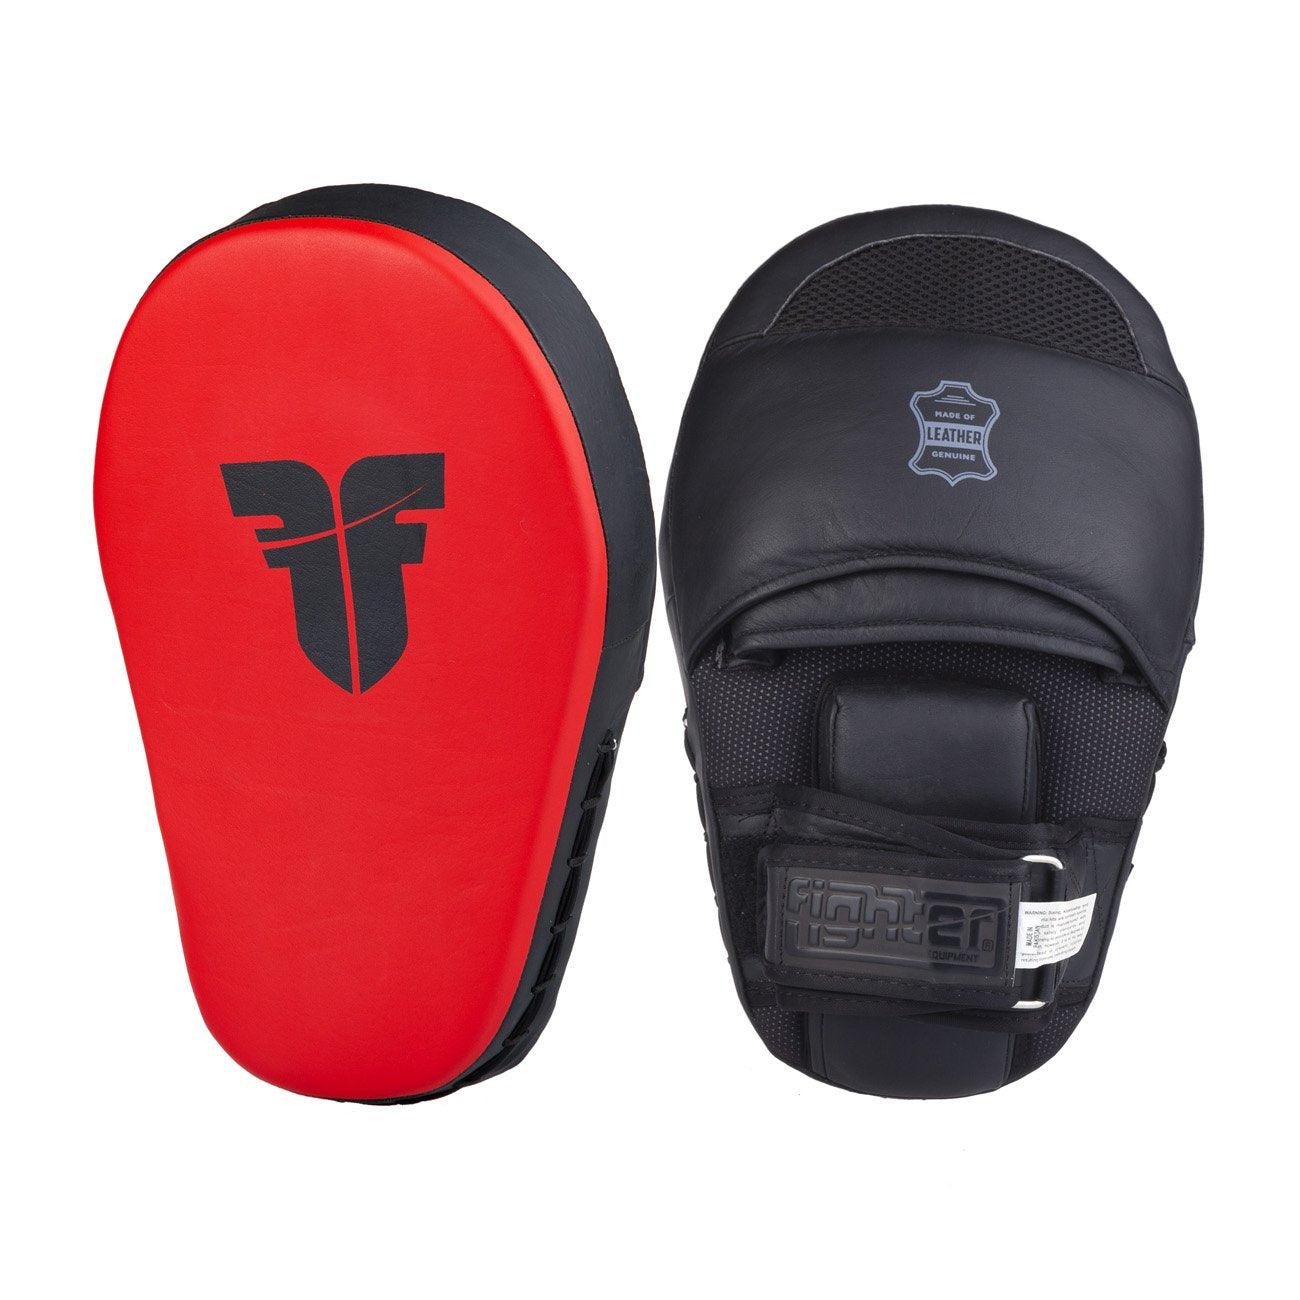 Fighter Focus Mitts - red